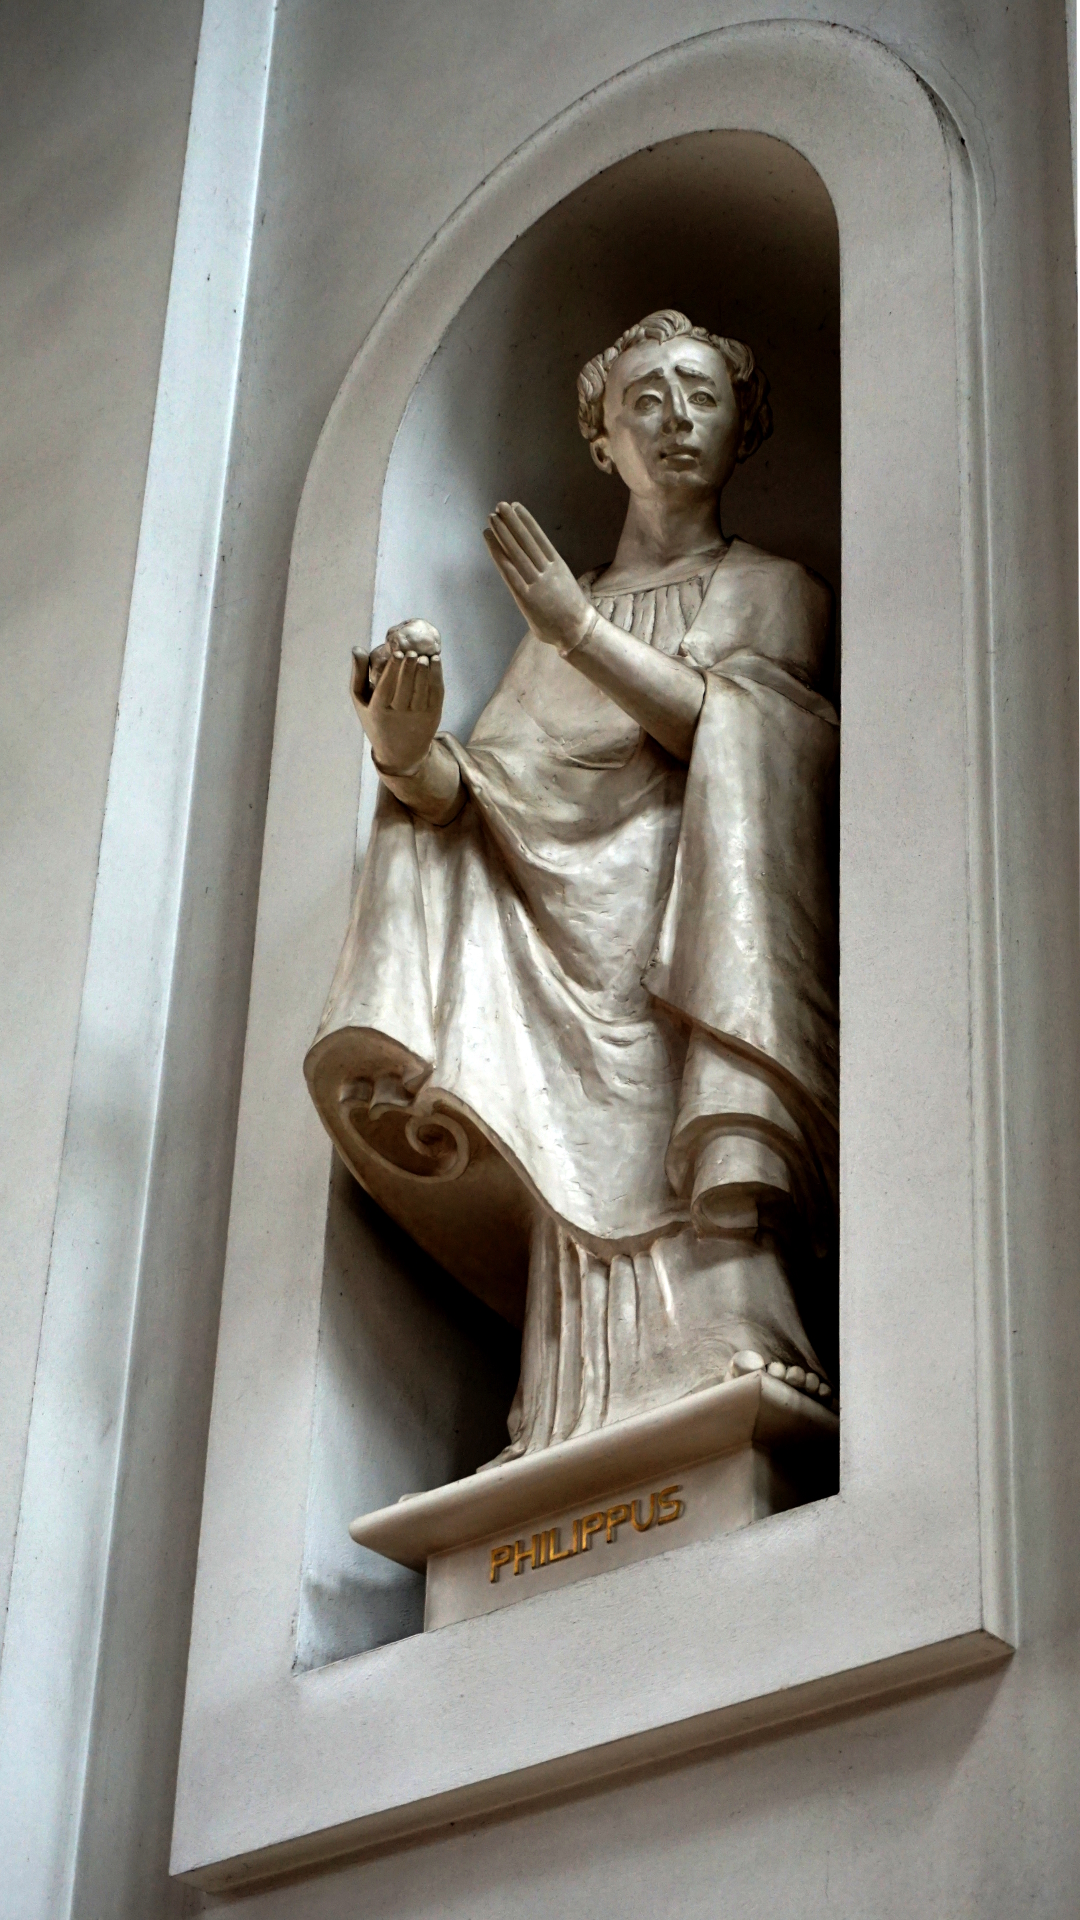 Apostelstatue Philippus in St. Clemens, Hannover — Experiment